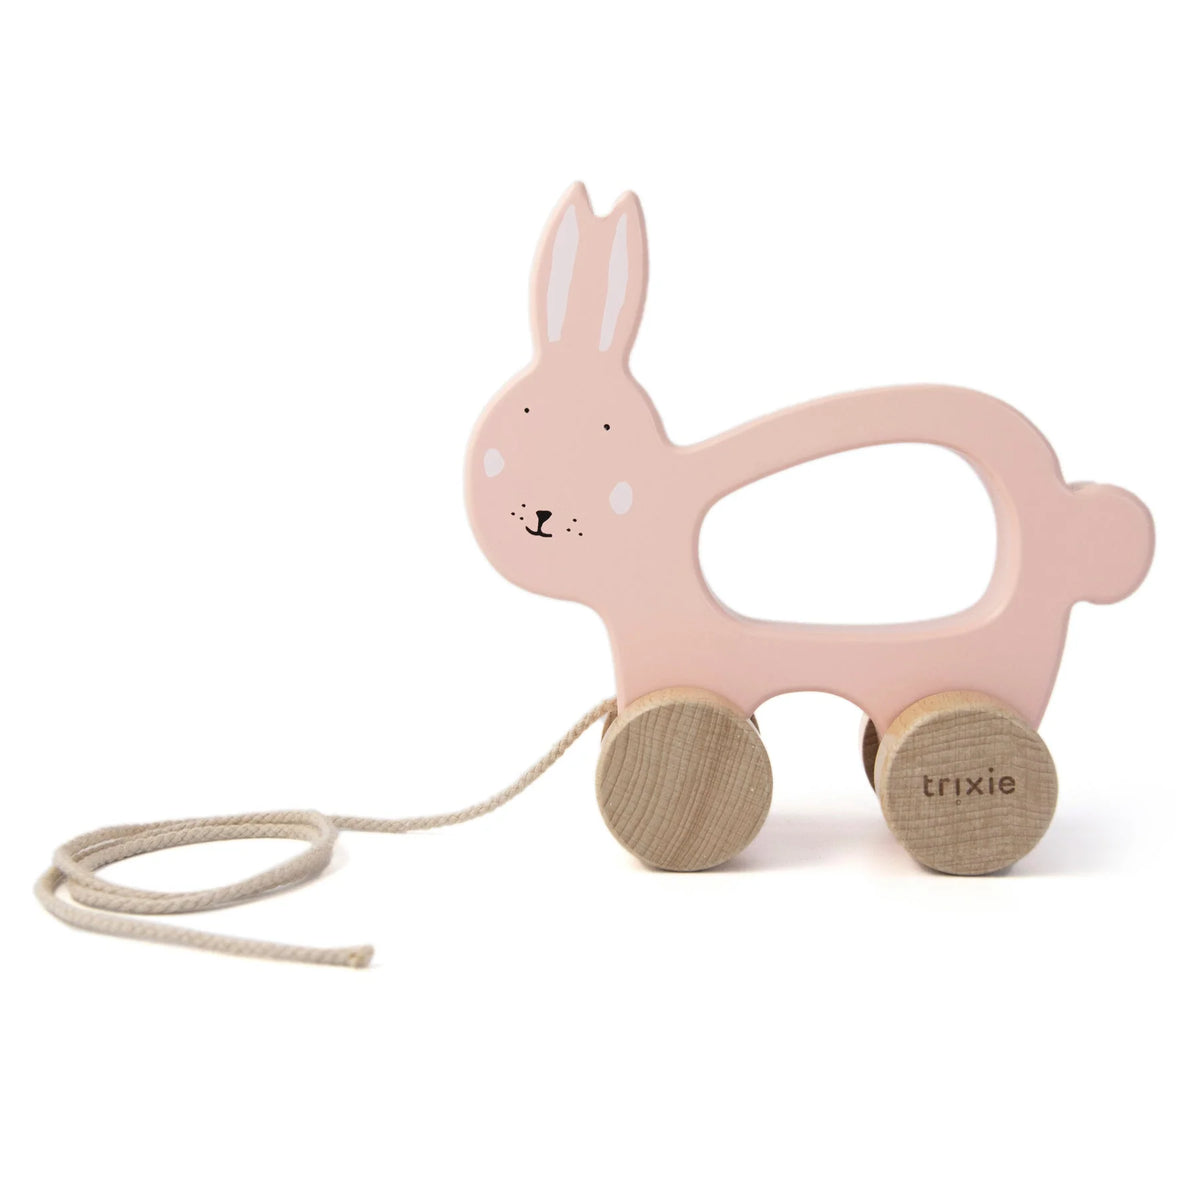 Trixie: Wooden Pull Along Toy-Mrs Rabbit